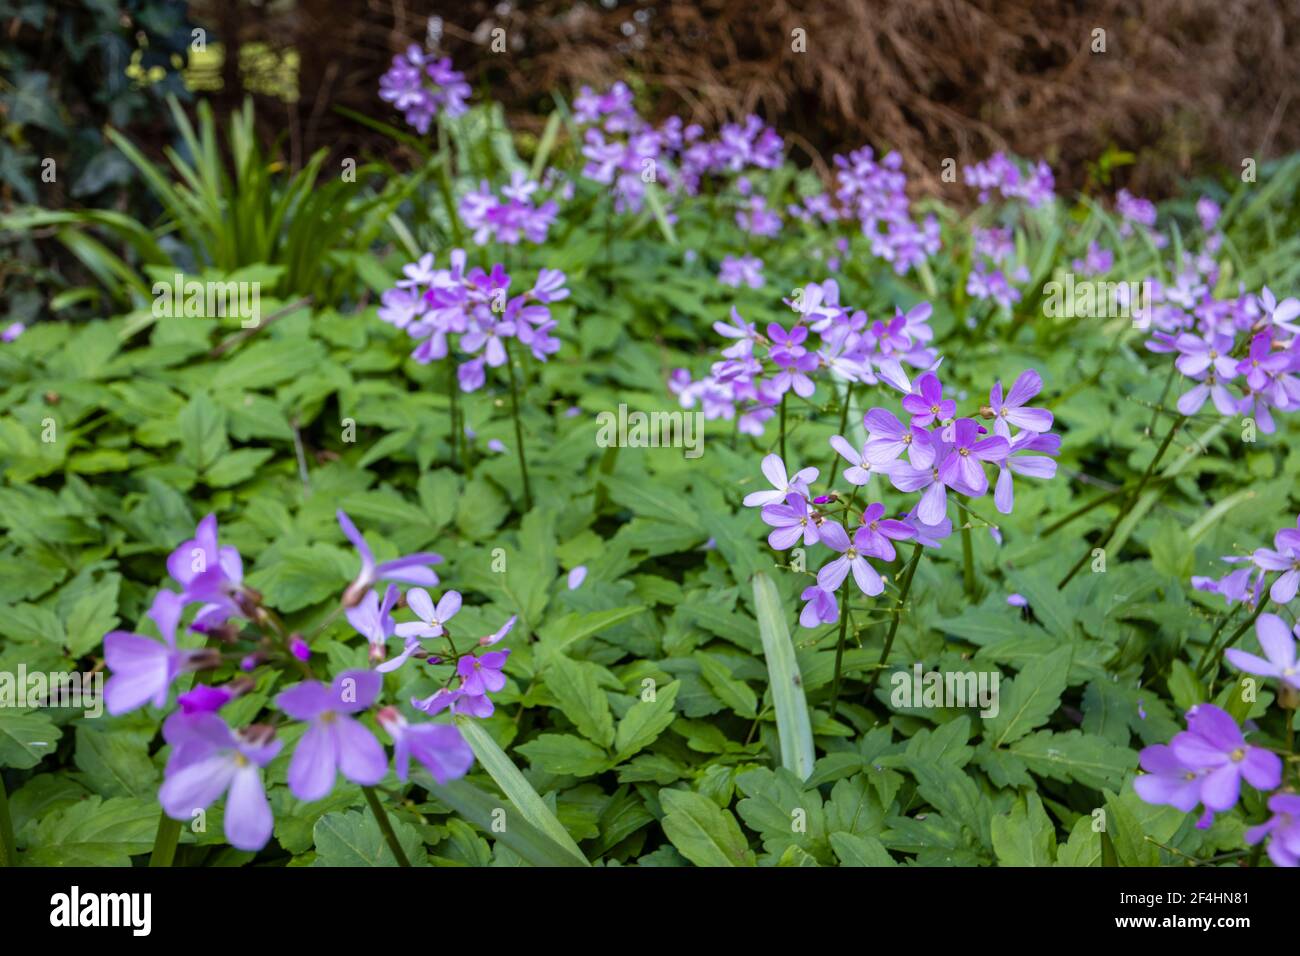 Spring flowering Cardamine quinquefolia (or Dentaria quinquefolia), the five-leaved cuckoo flower, growing in a garden in Surrey, south-east England Stock Photo